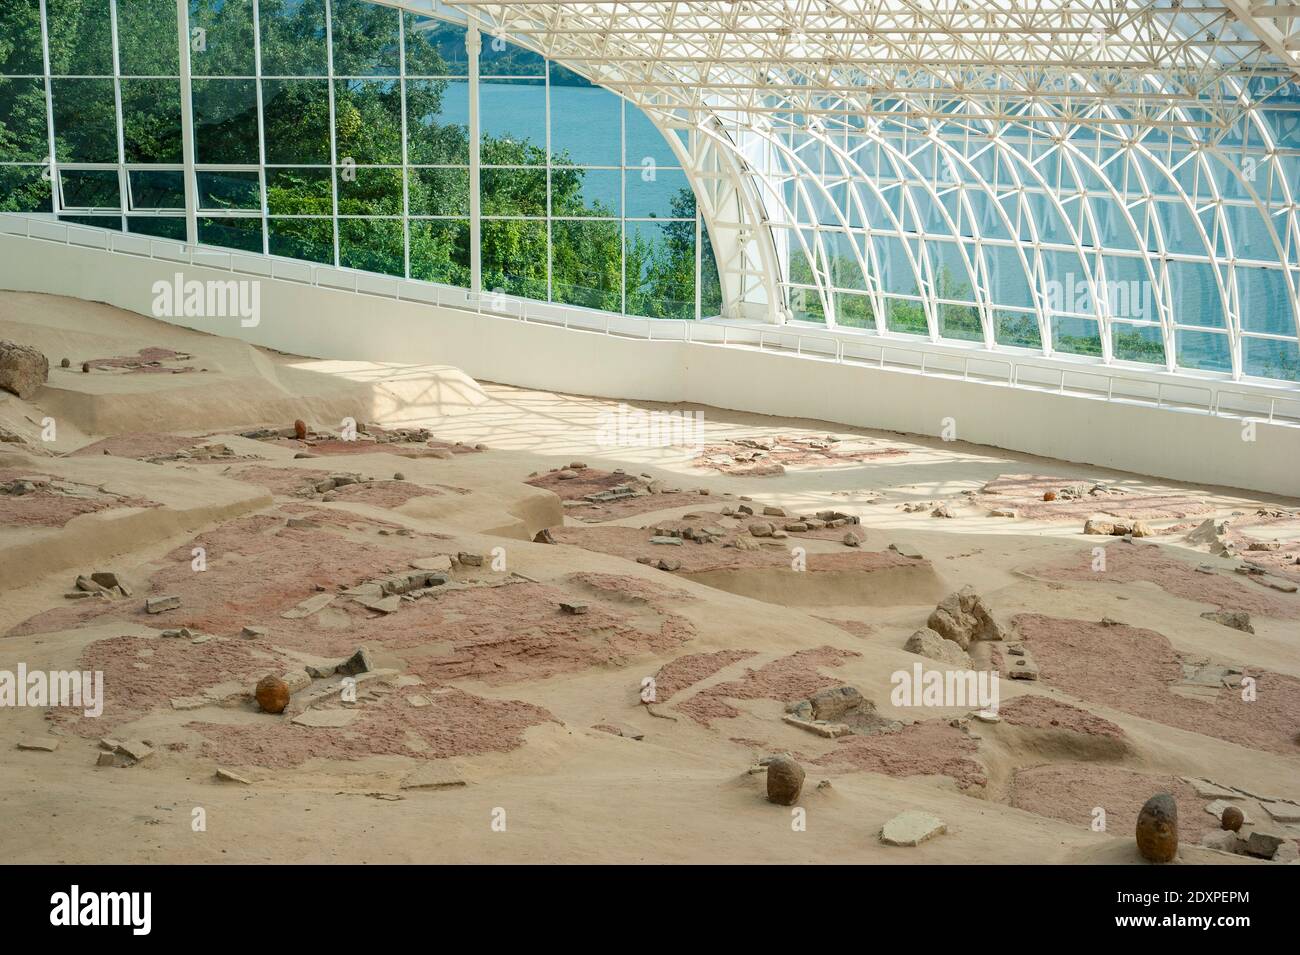 Lepenski vir Museum, displays the artecasts of the oldest human settlement in Europe. Serbia Stock Photo